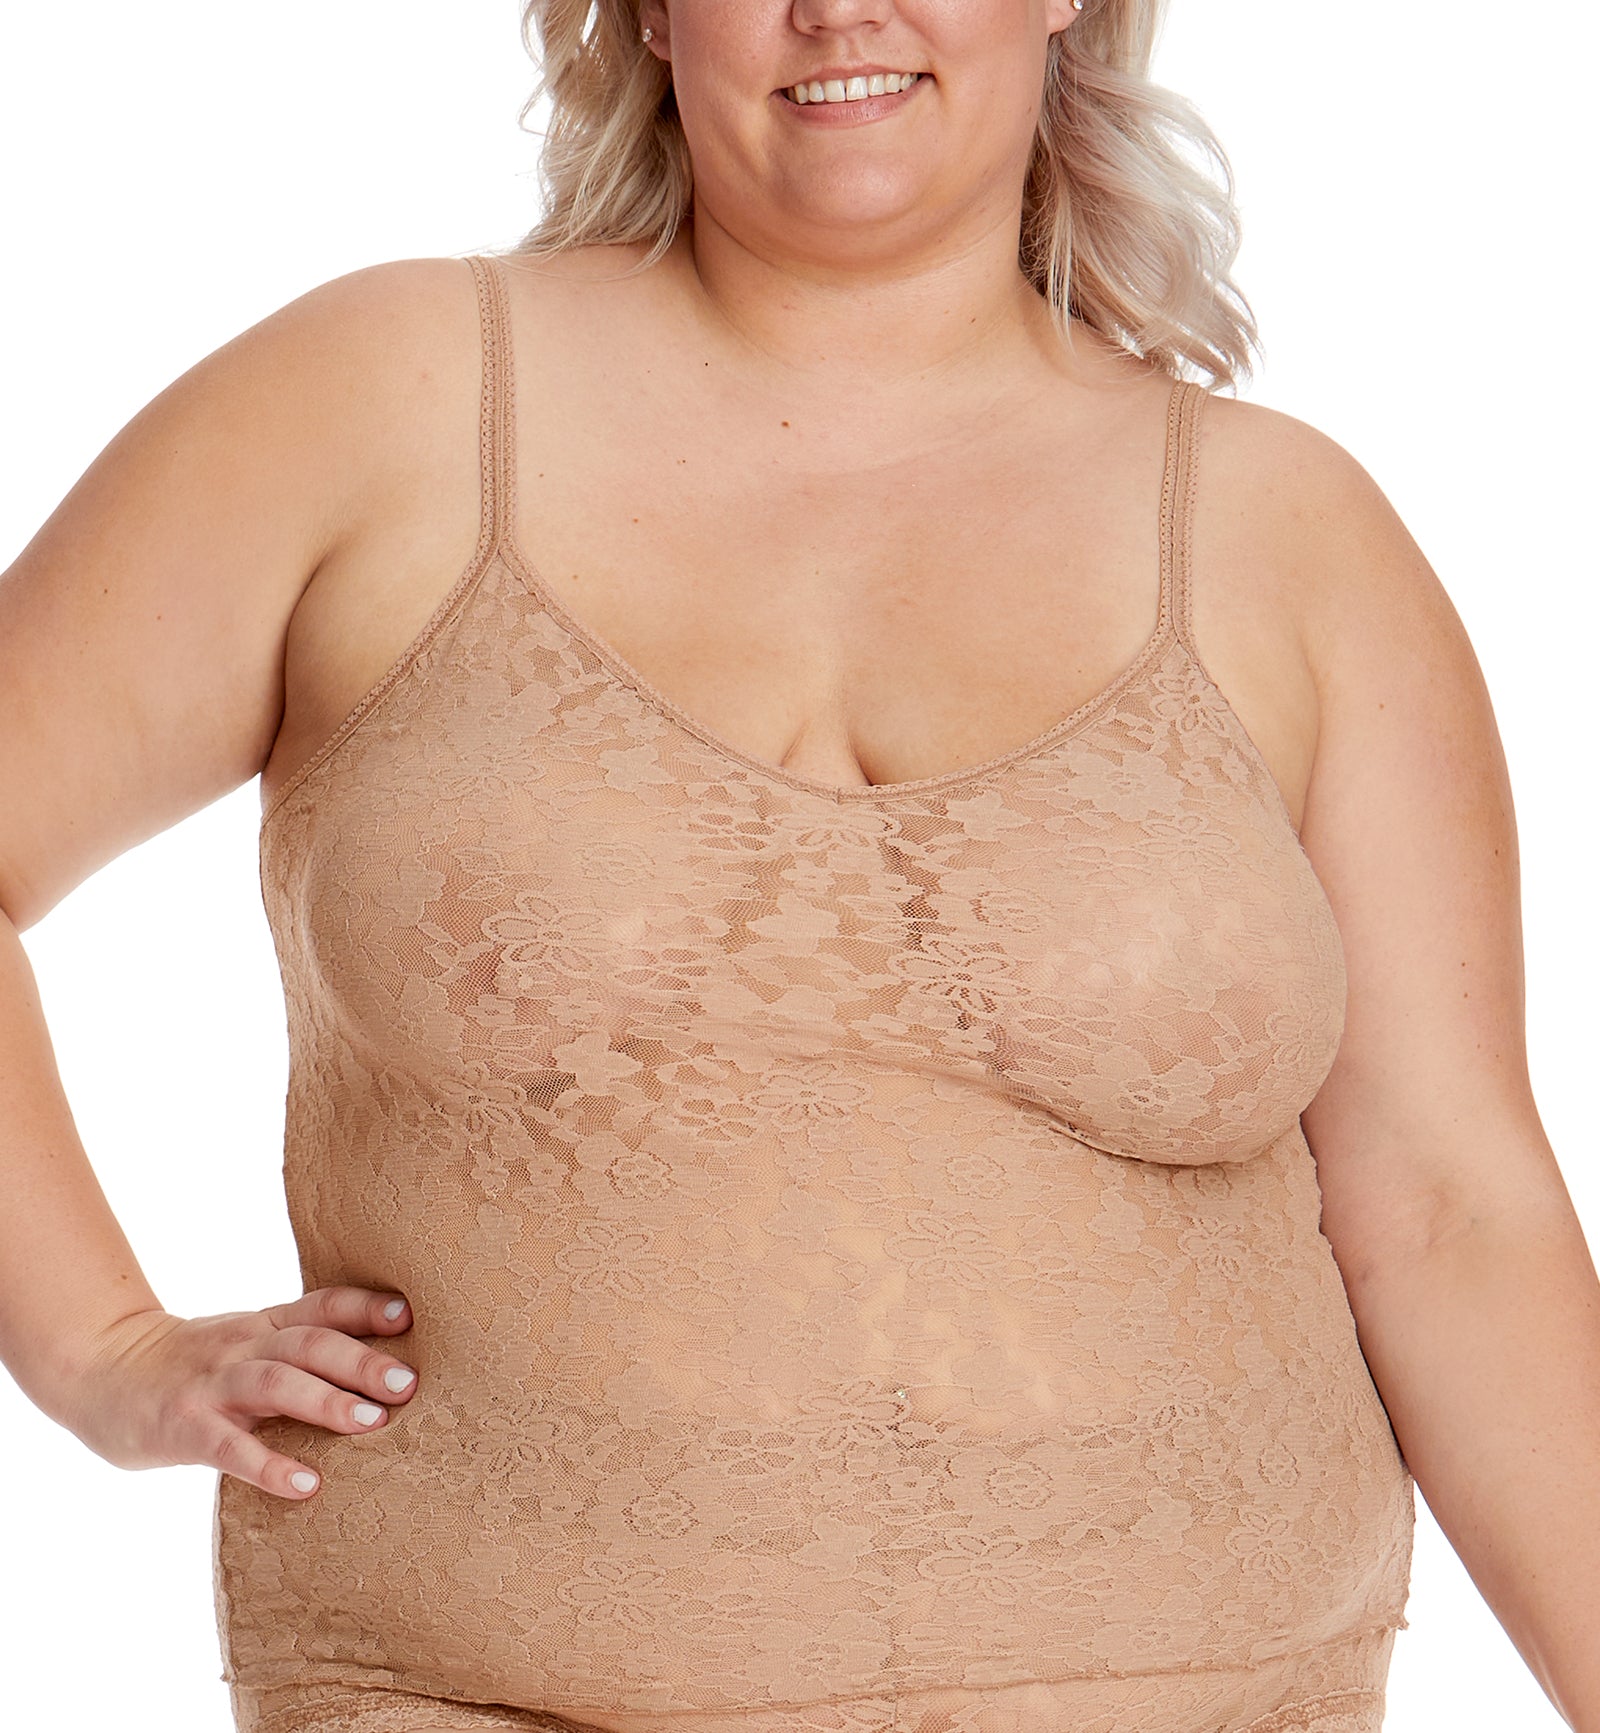 Hanky Panky Daily Lace Camisole PLUS (774731X),1X,Taupe - Taupe,1X